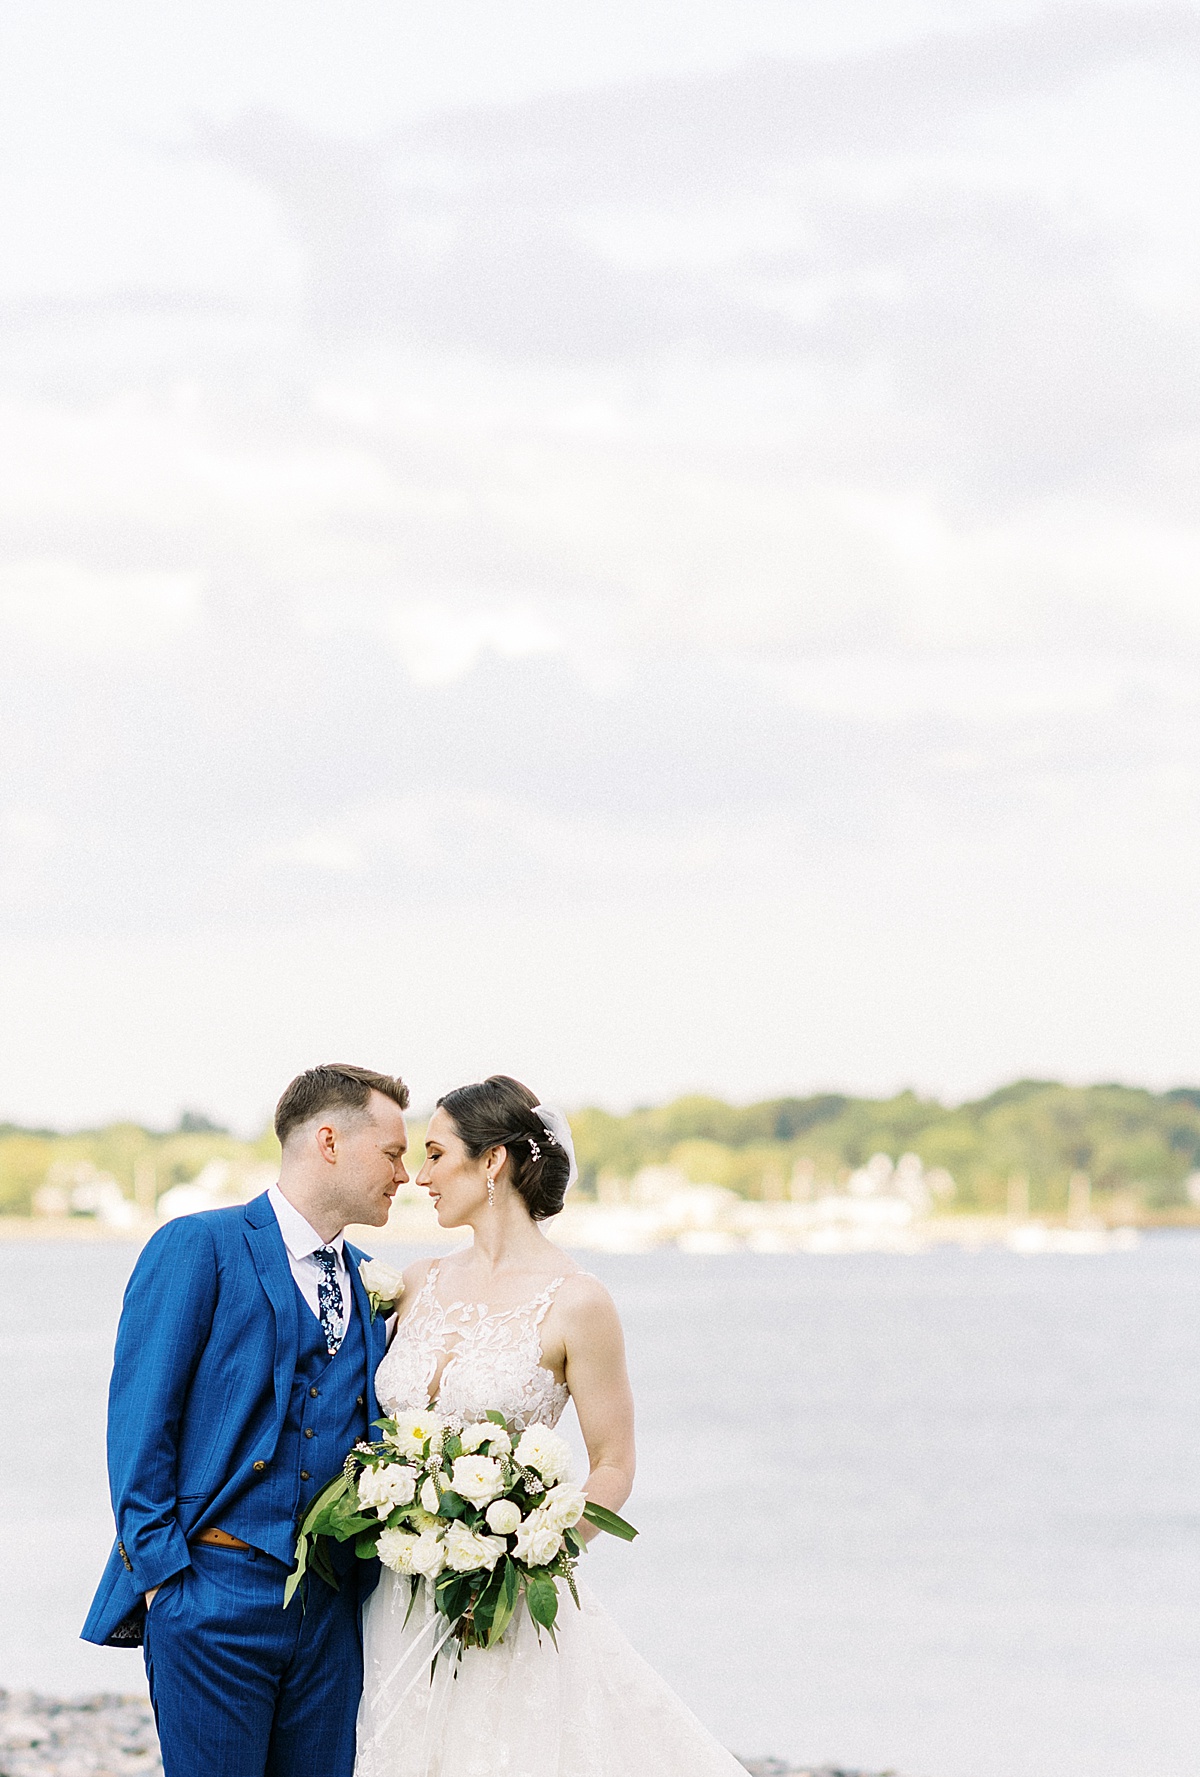 classy bride and groom in white lace and blue tux pose by water shot by Lynne Reznick Photography